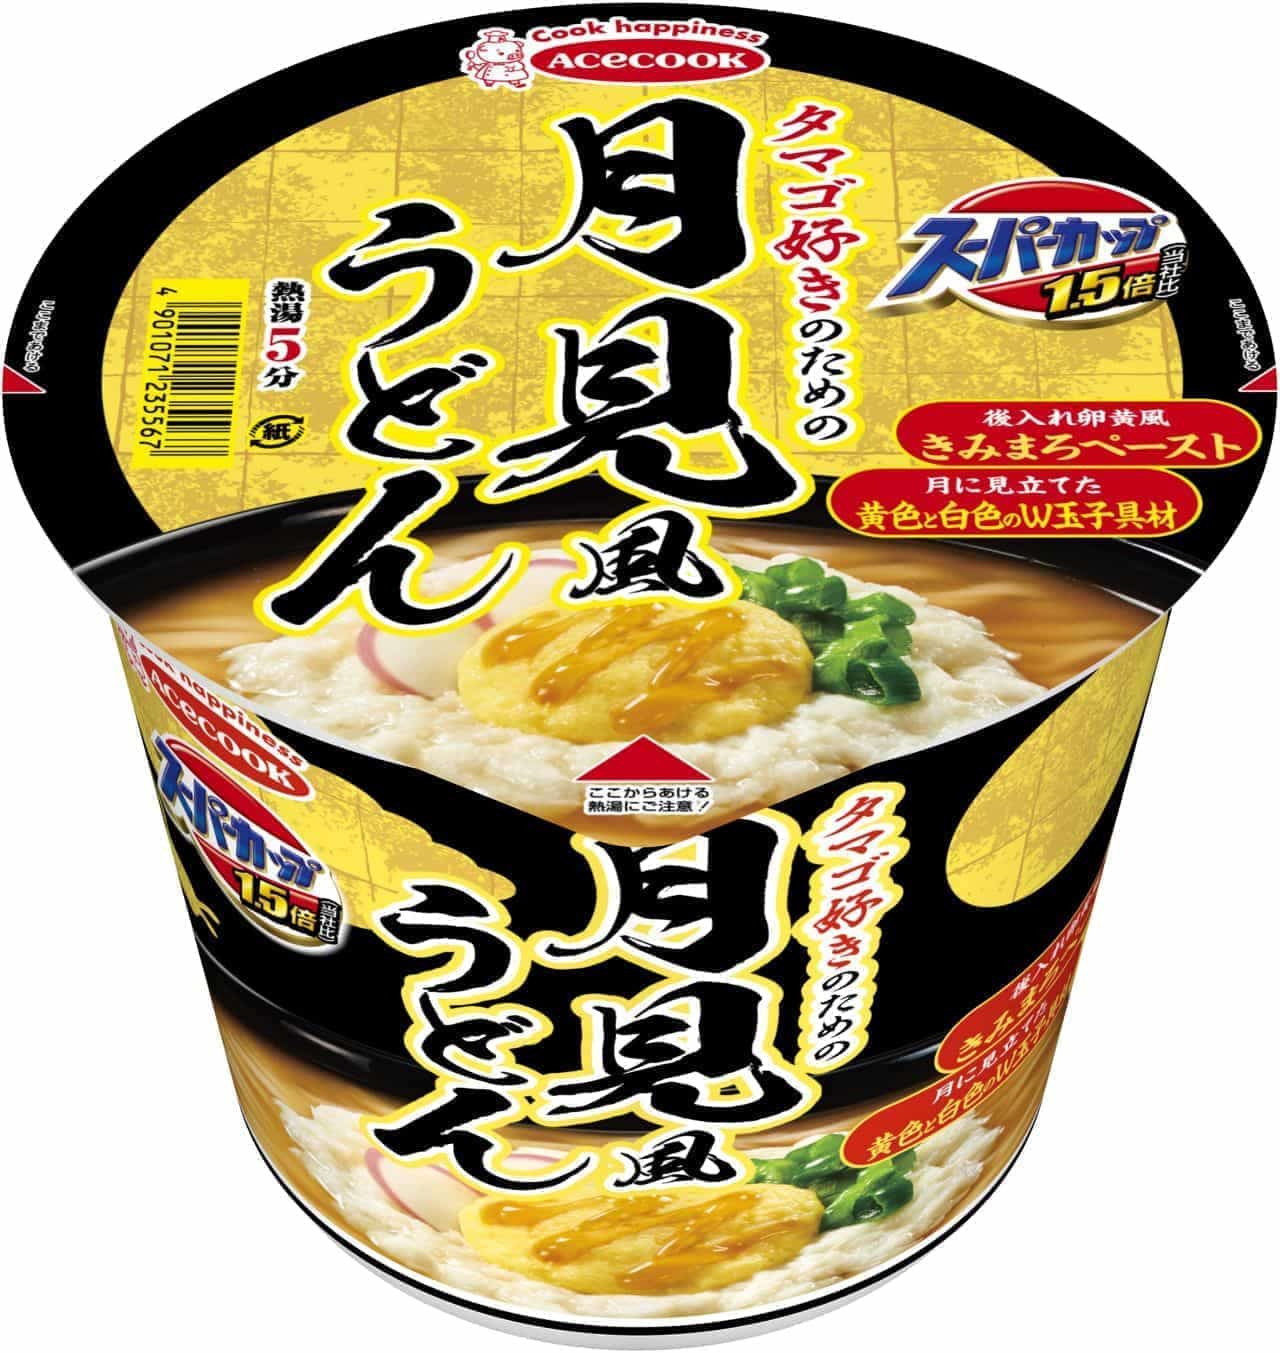 Acecook "Super Cup 1.5x Tsukimi-style Udon for Egg Lovers"